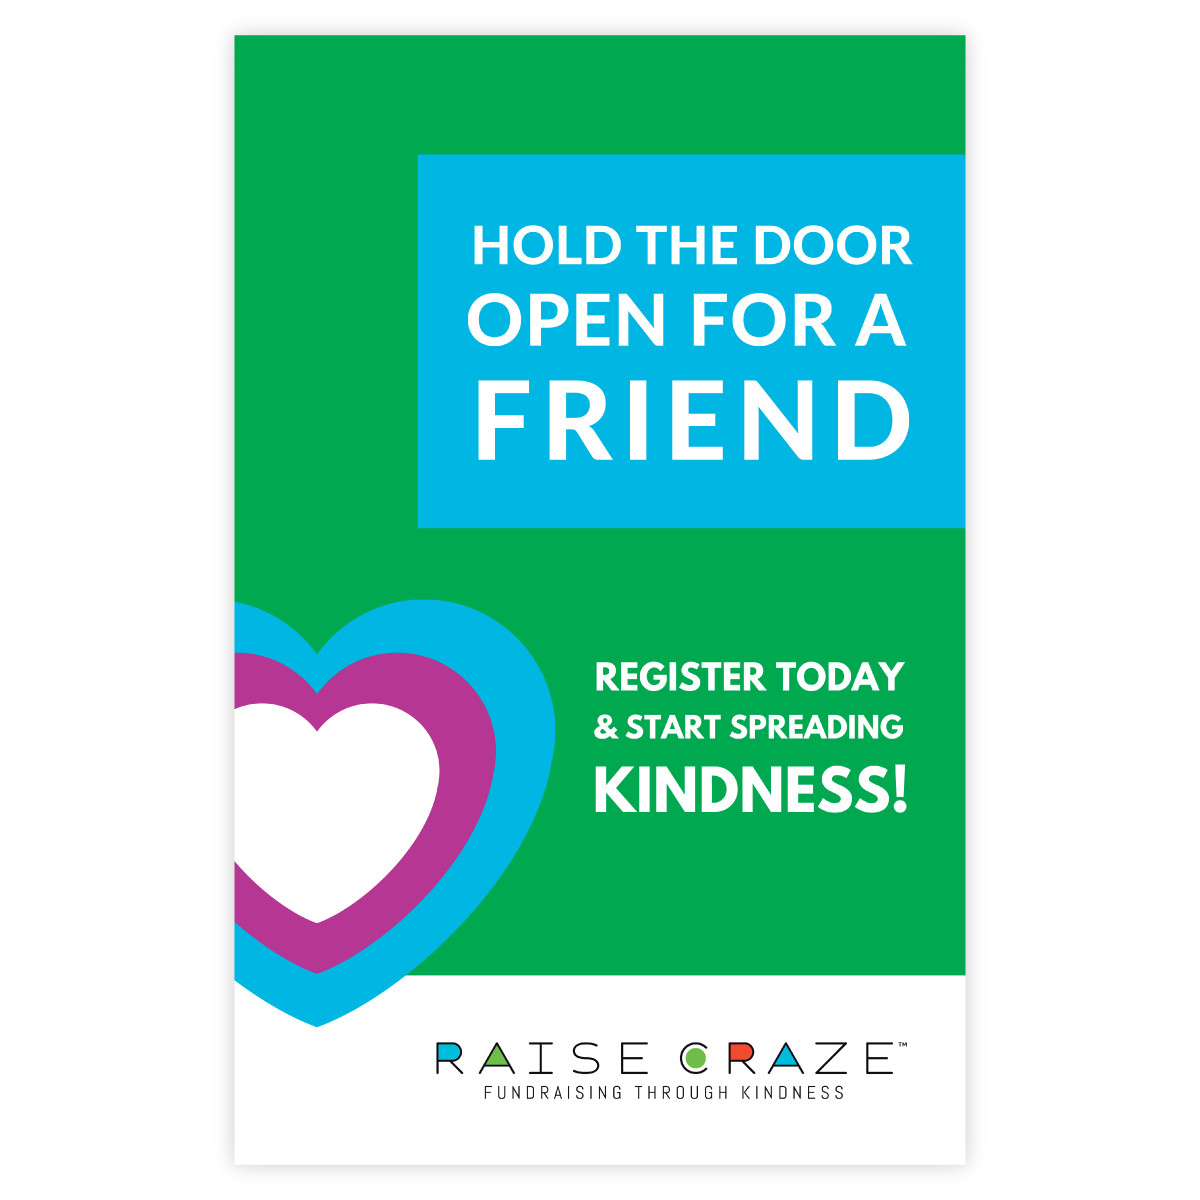 Raise Craze Poster - Hold the Door Open for a Friend 